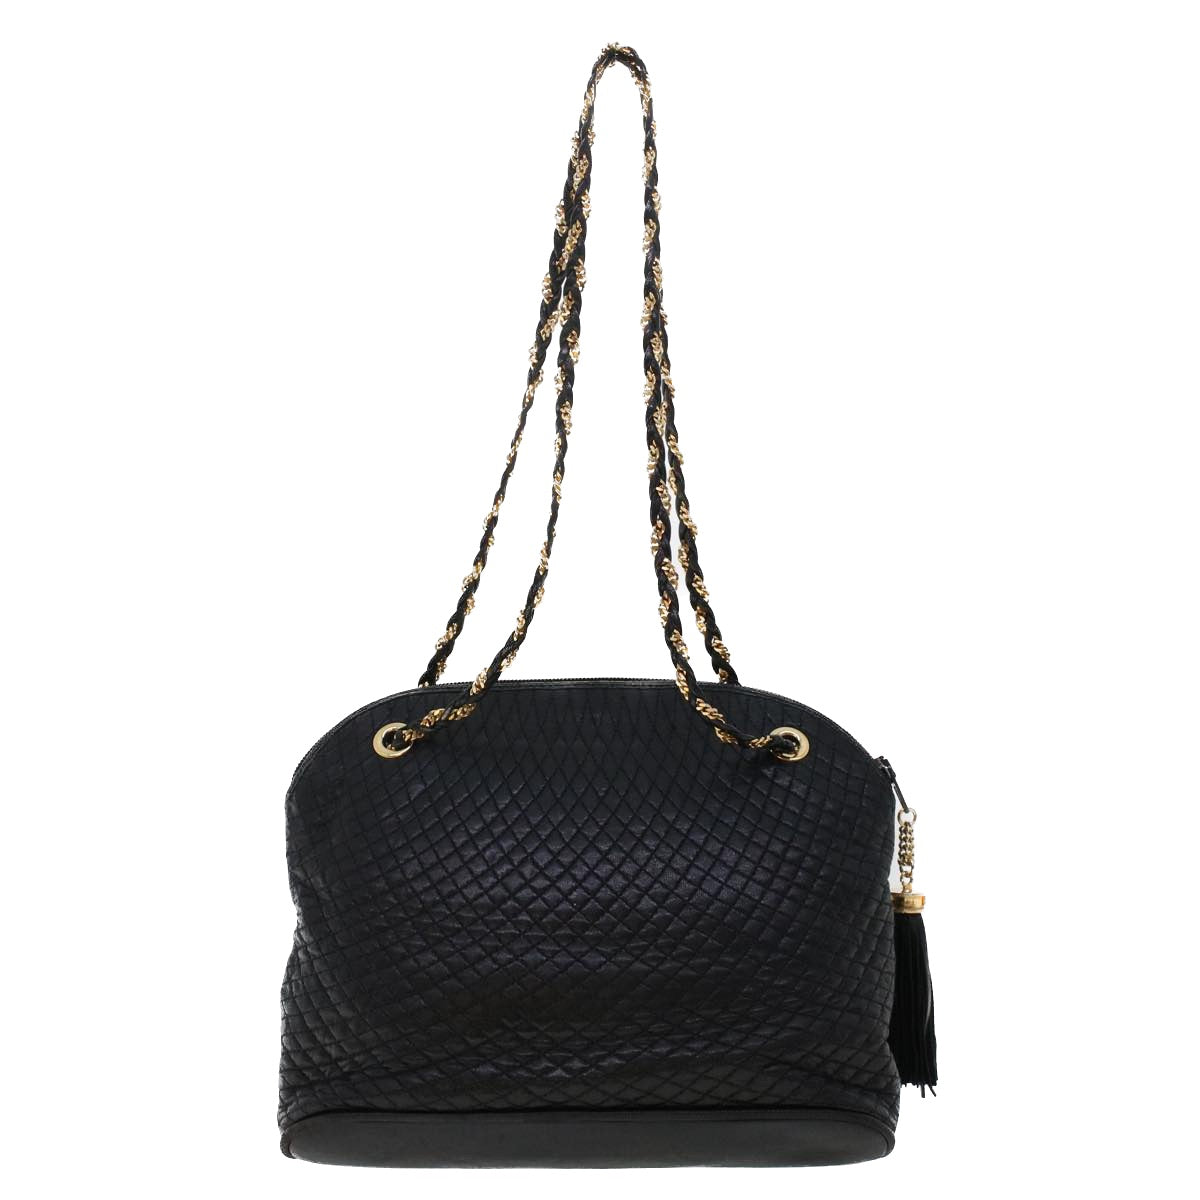 BALLY Chain Shoulder Bag Leather Black Auth bs6487 - 0